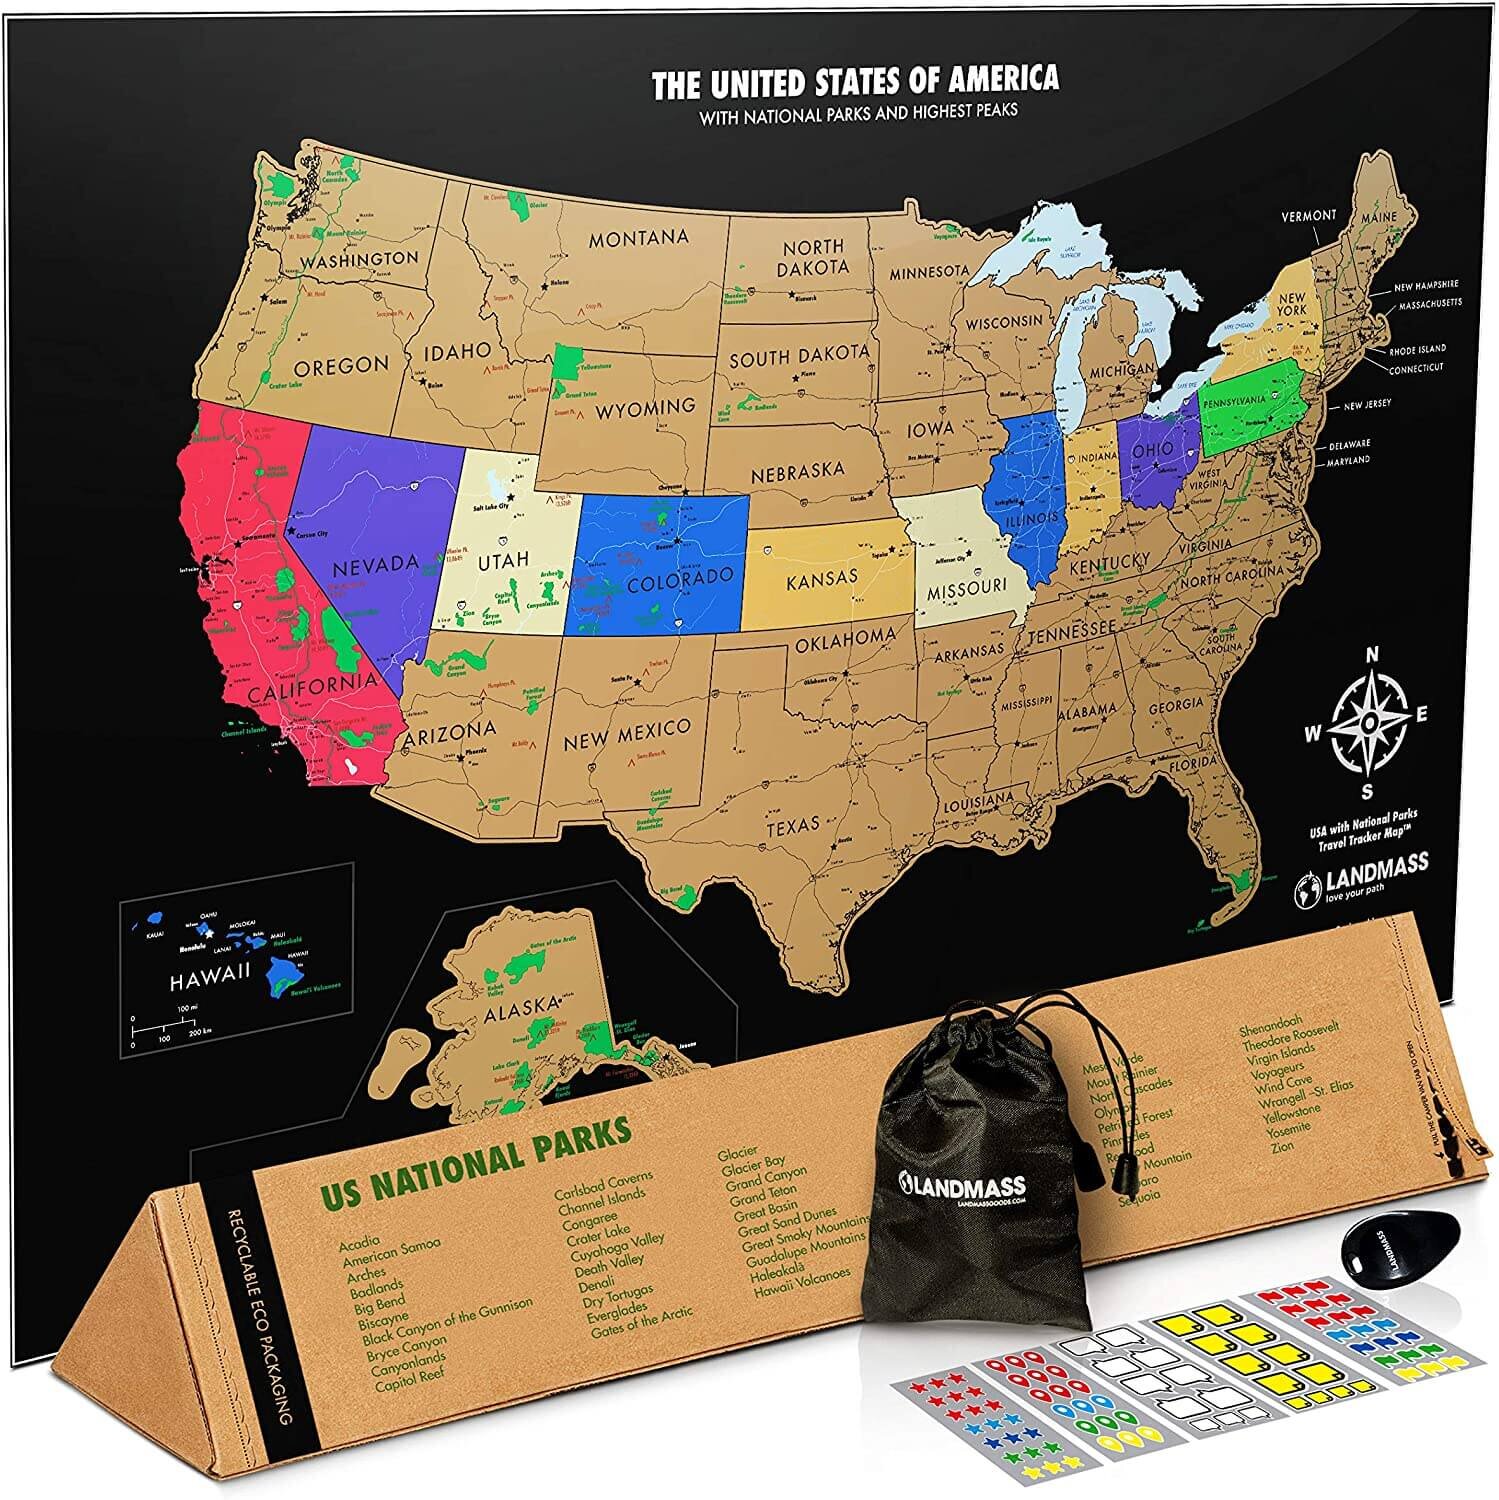 National Parks Scratch Off Map 12×16 (Charcoal Grey)